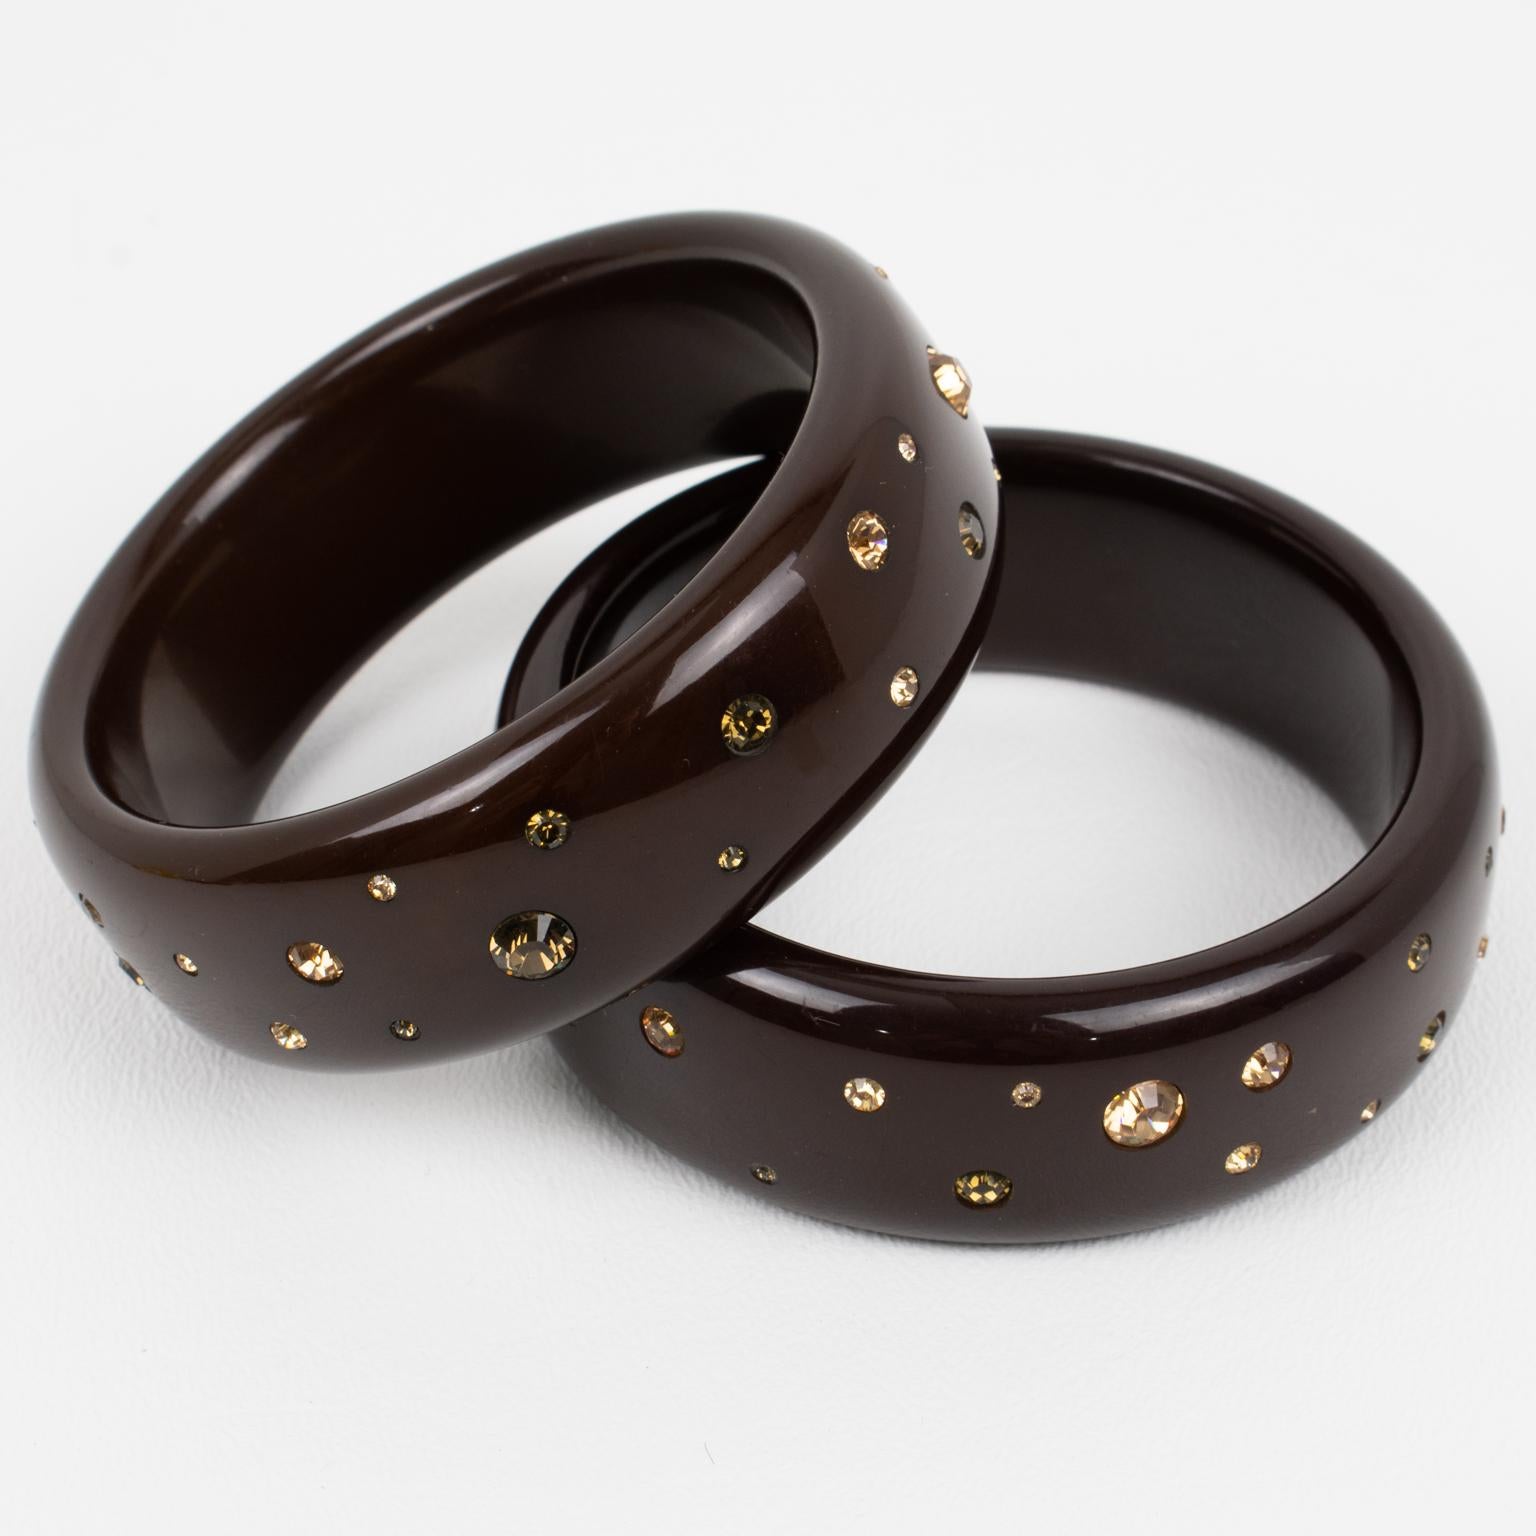 These outstanding Borbonese, Italy Lucite bracelet bangles feature a domed shape in cocoa brown color. The bangles are ornate with light topaz and smoke-brown crystal rhinestones randomly hand-setted. Both bracelets are marked with the engraved